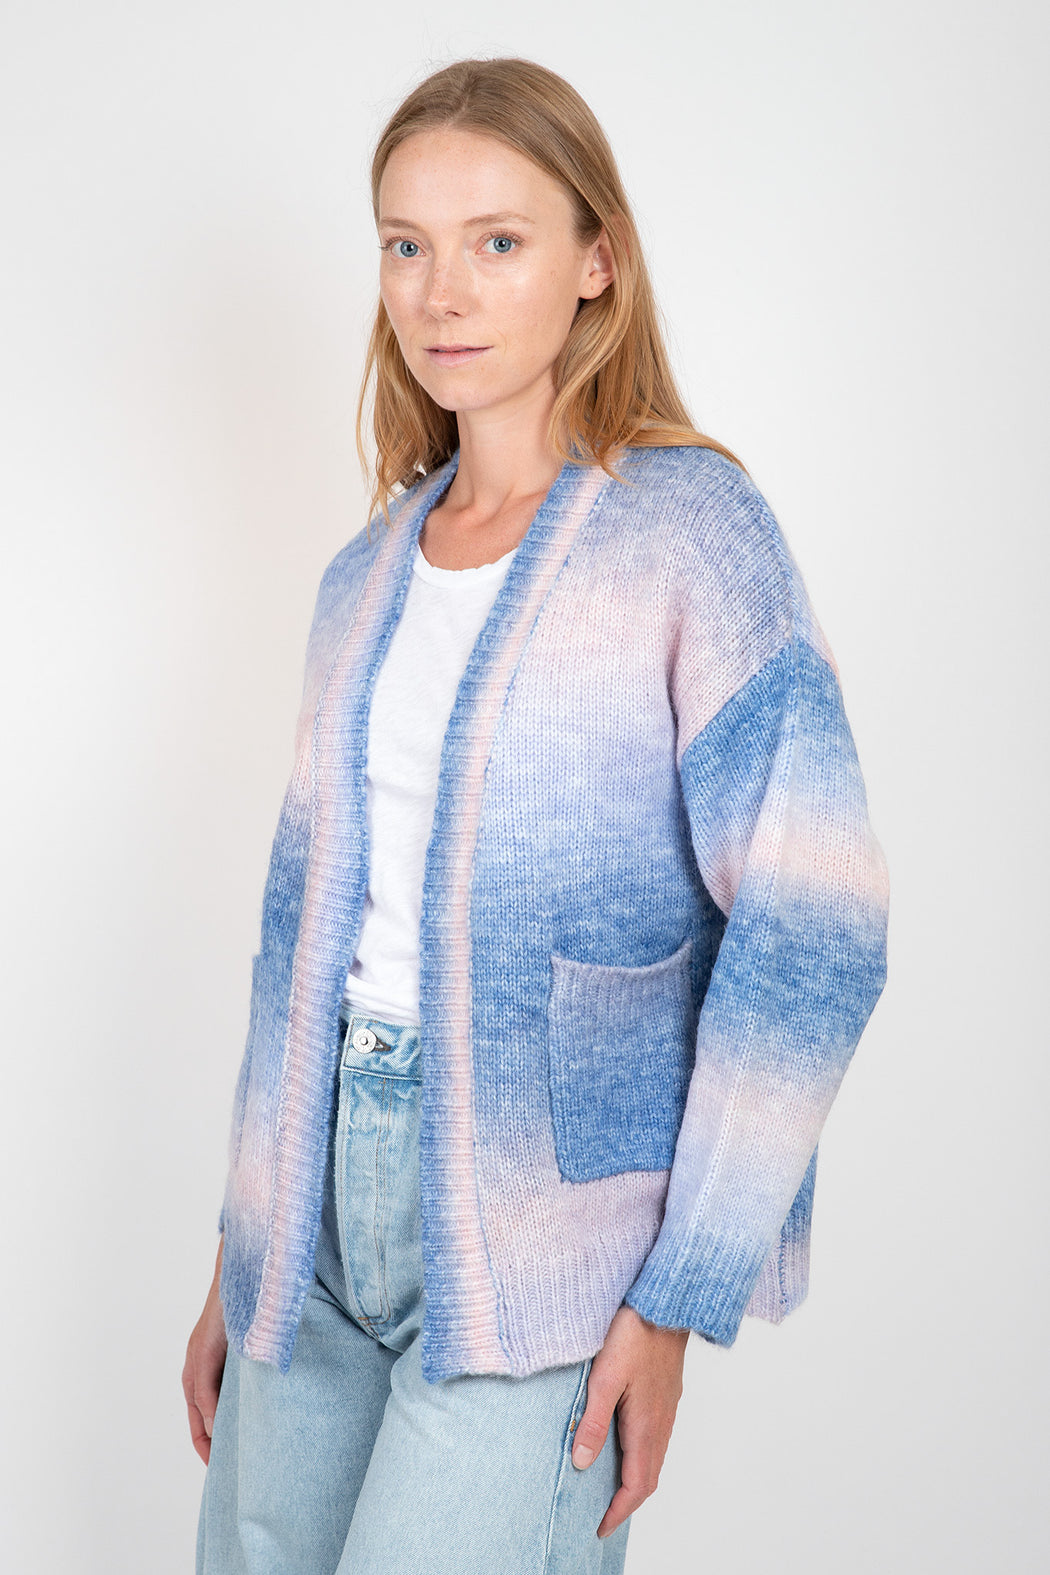 Lyla-Luxe-Betsy-Ombre-Cardigan-Blue-Pink